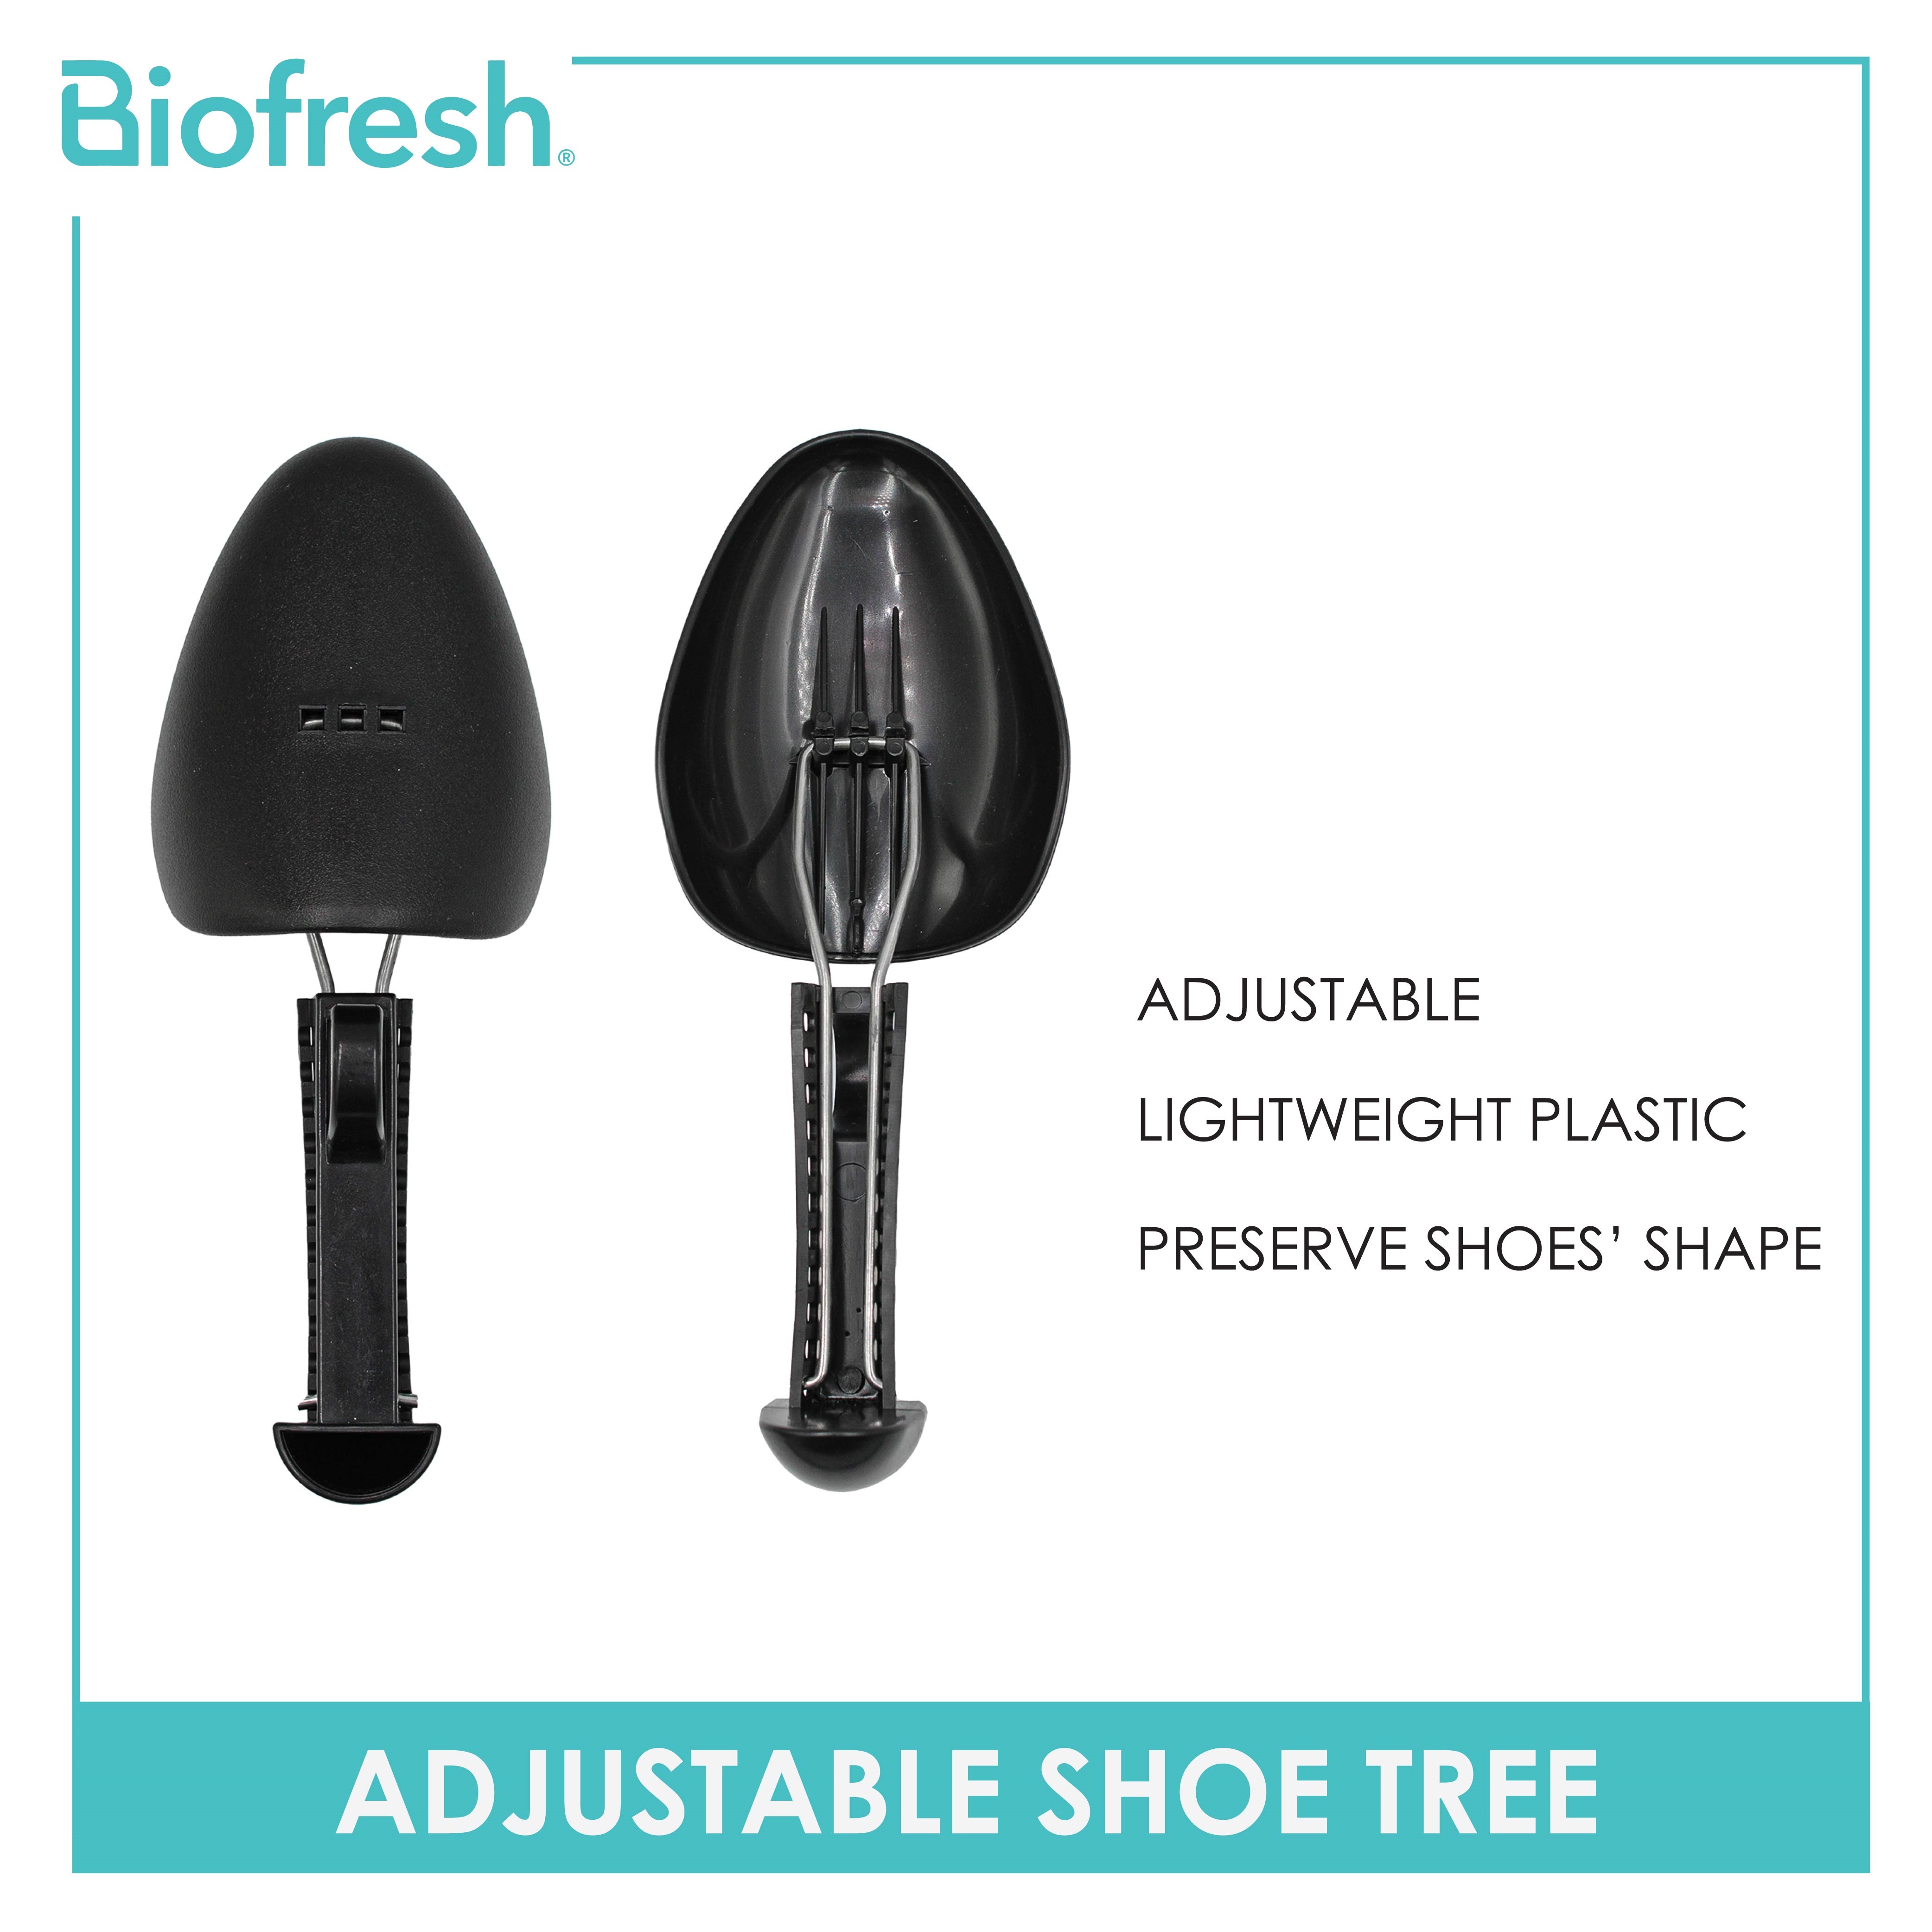 Biofresh Ladies' Adhesive Invisible Height Booster Gel Insole FLHB01